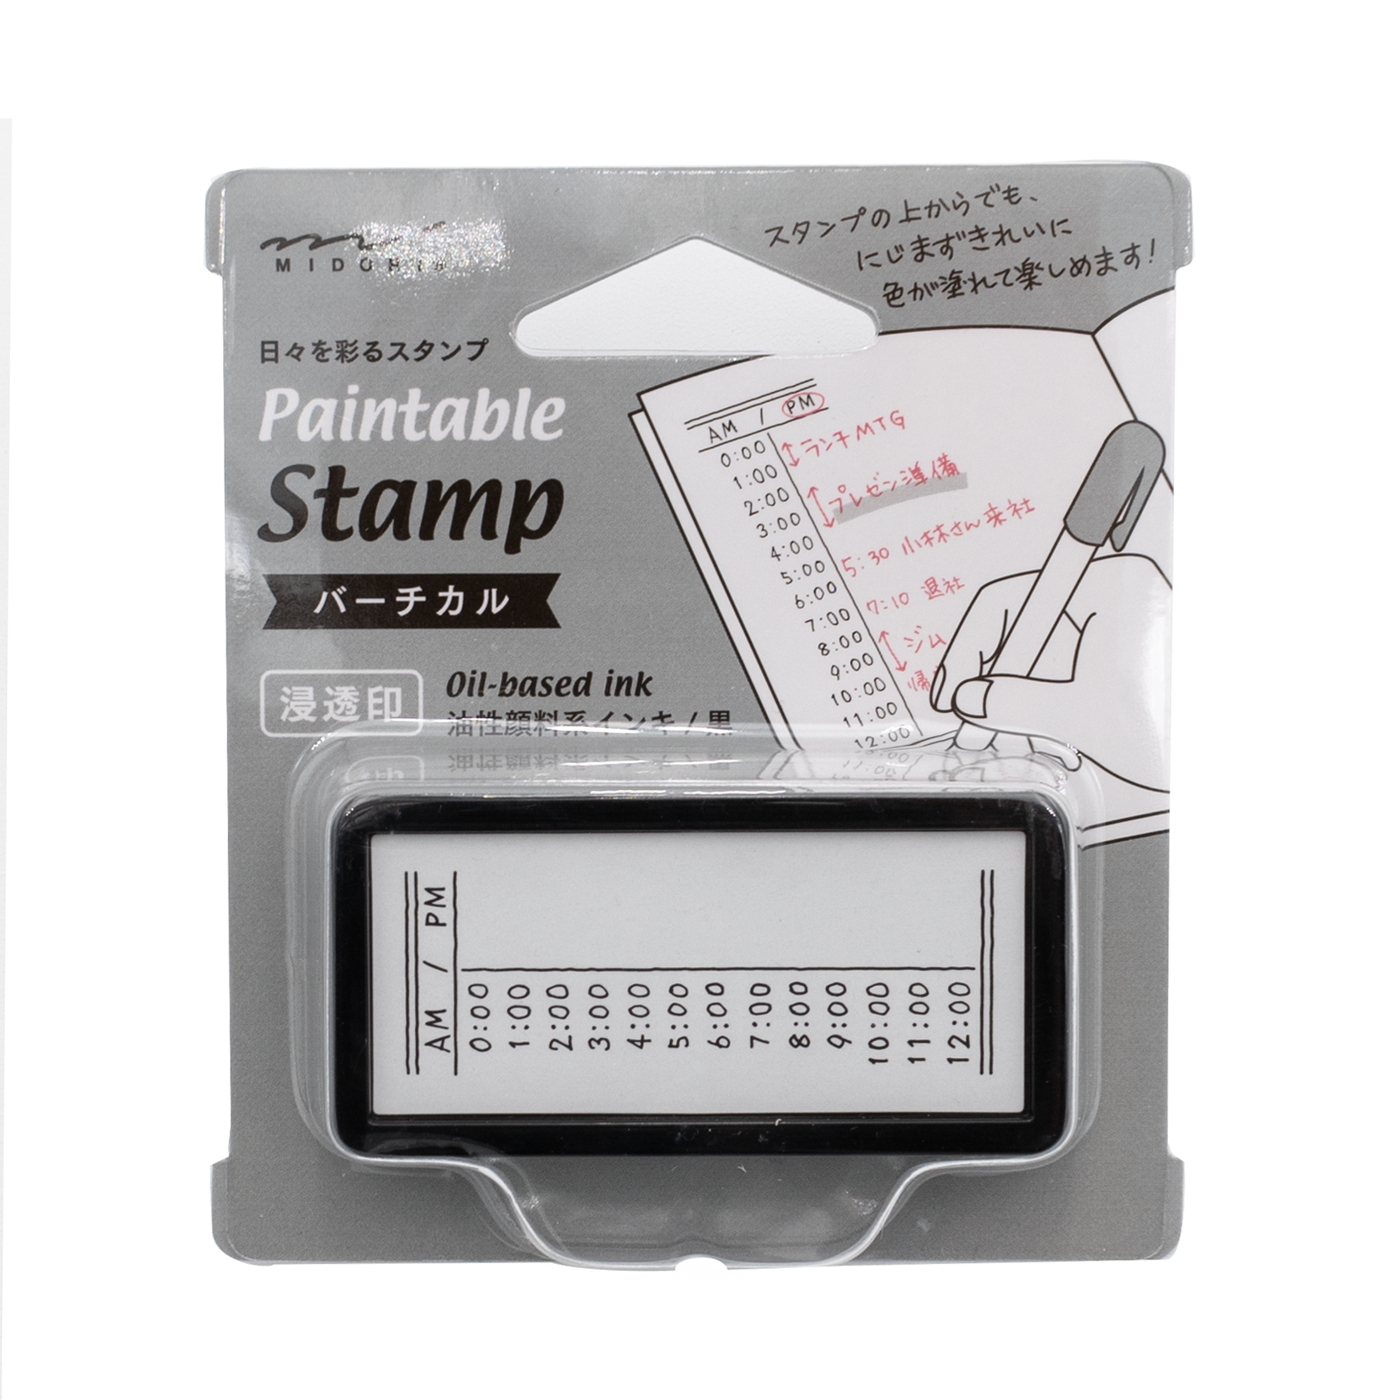 Midori Paintable Stamp - Pre Inked - Vertical Time